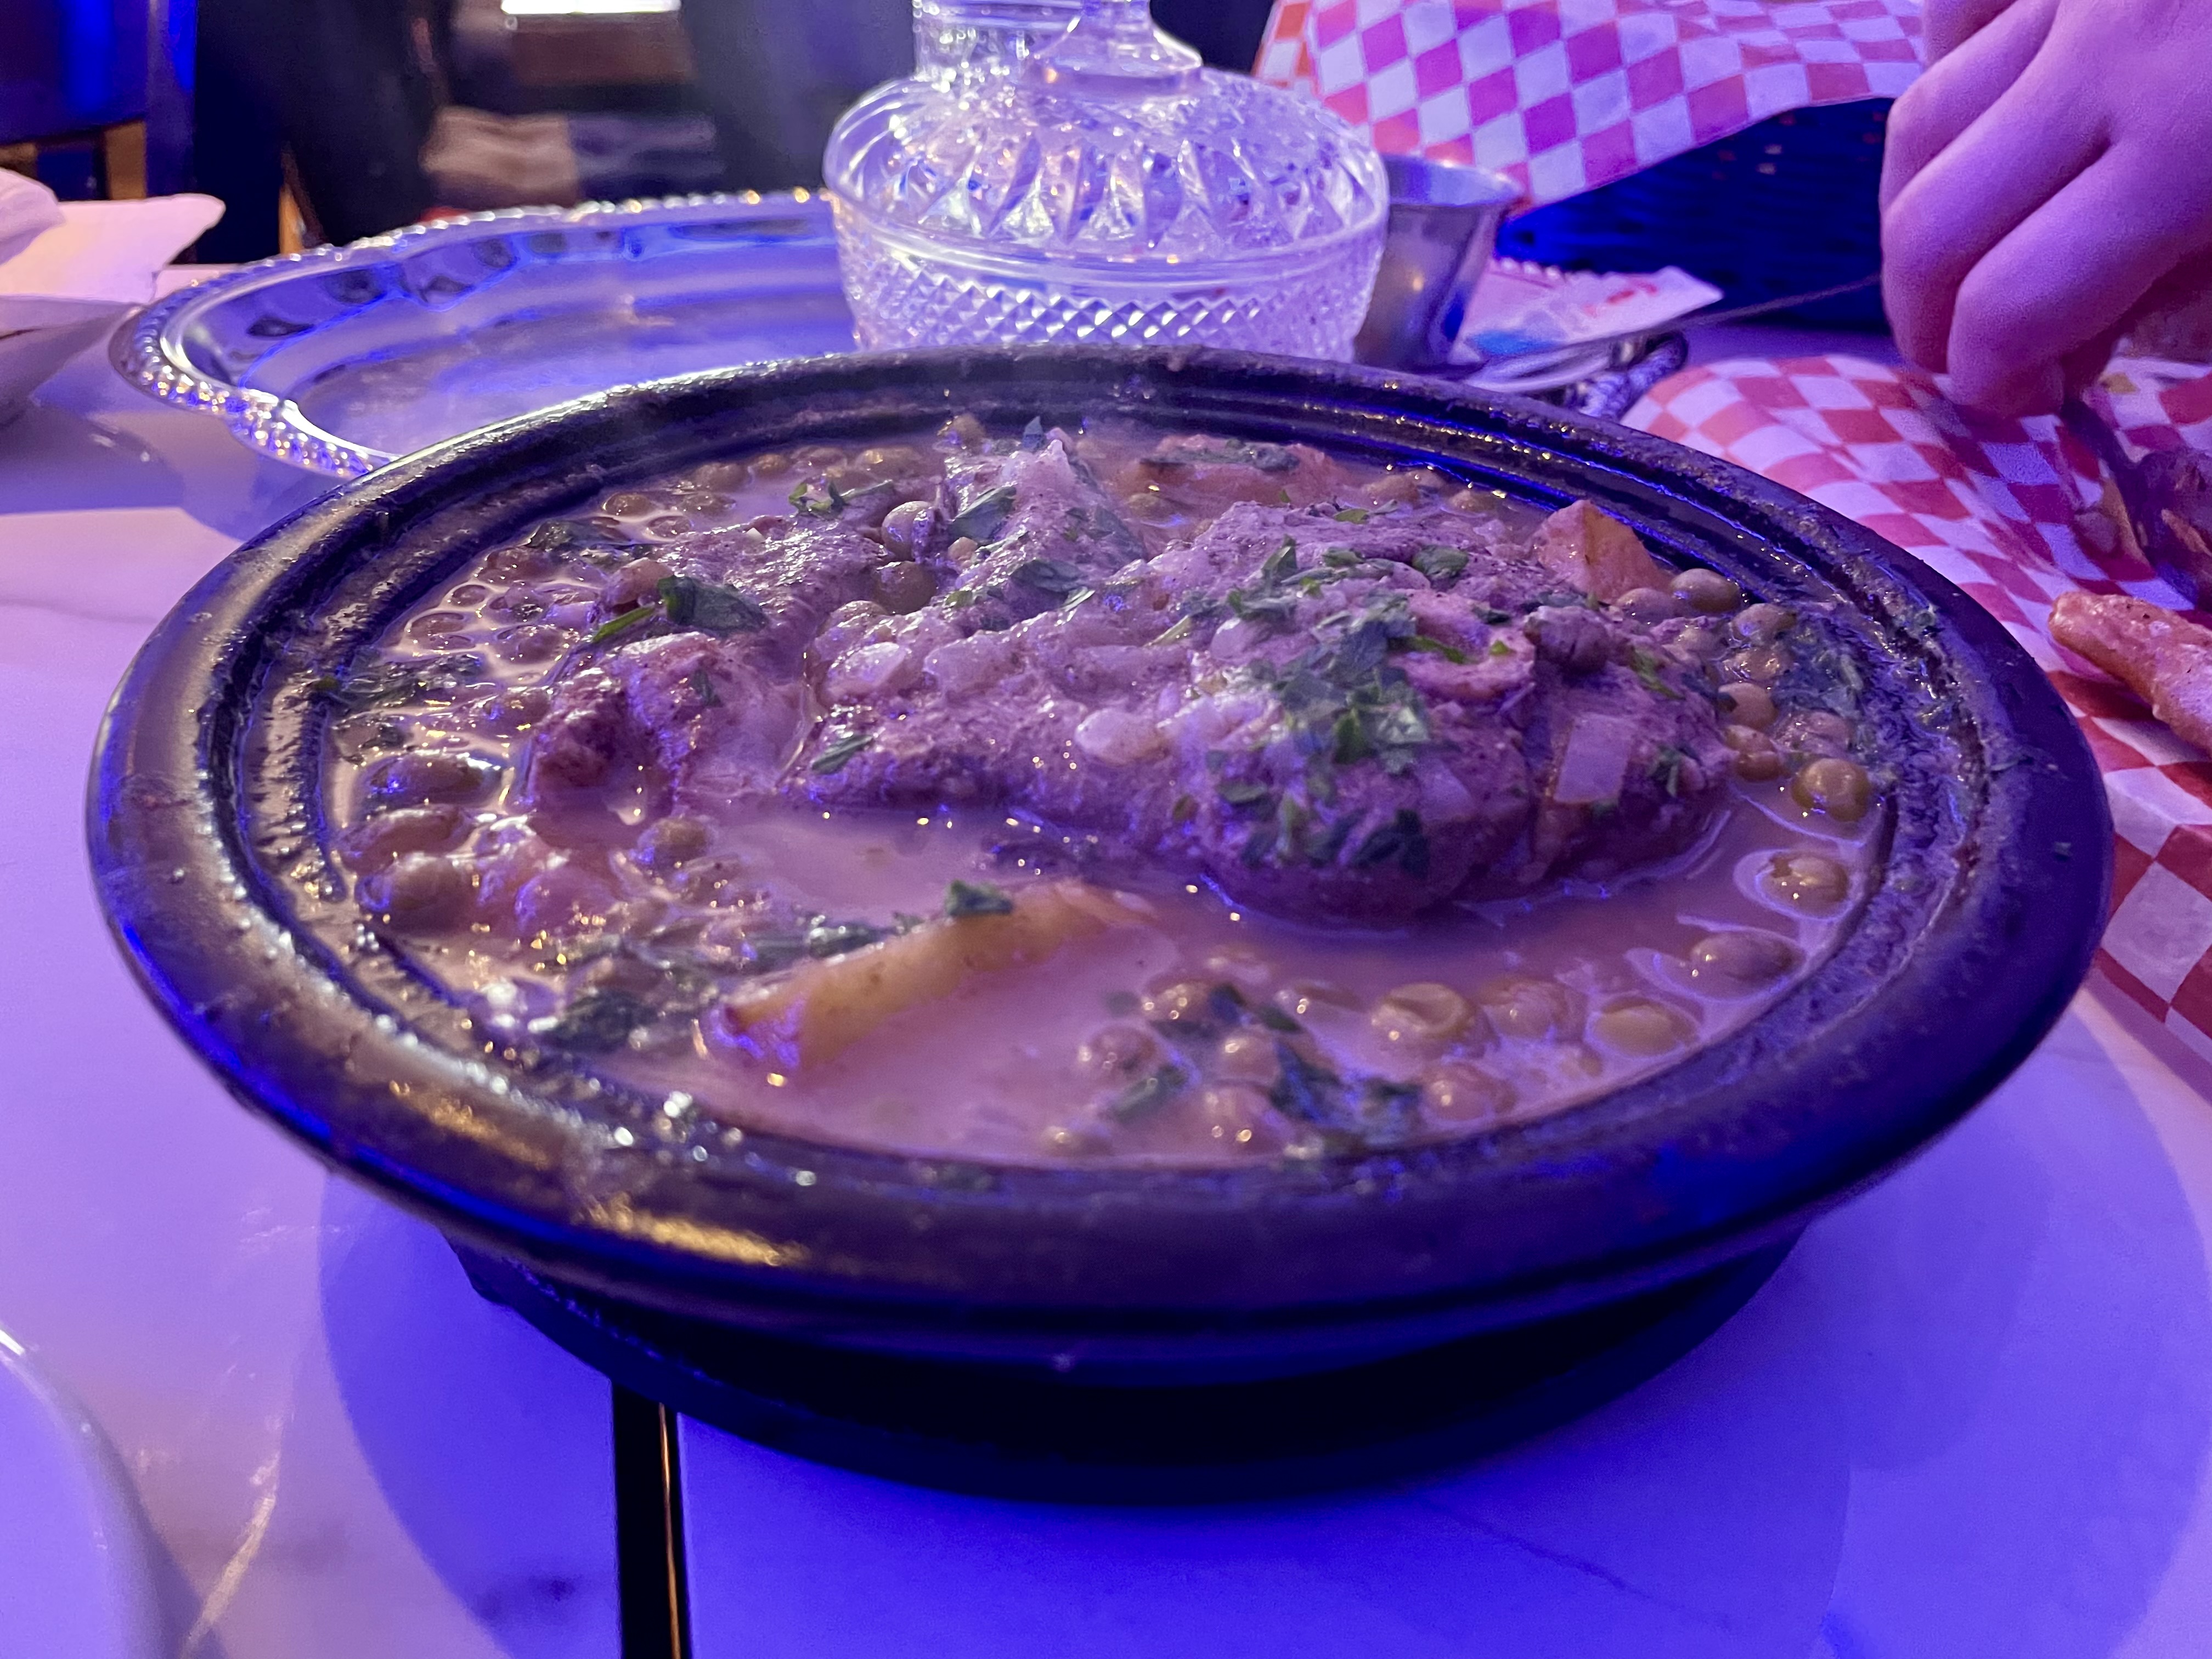 The potato tajine is served with a rich sauce, succulent pieces of lamb green peas and, of course, potatoes